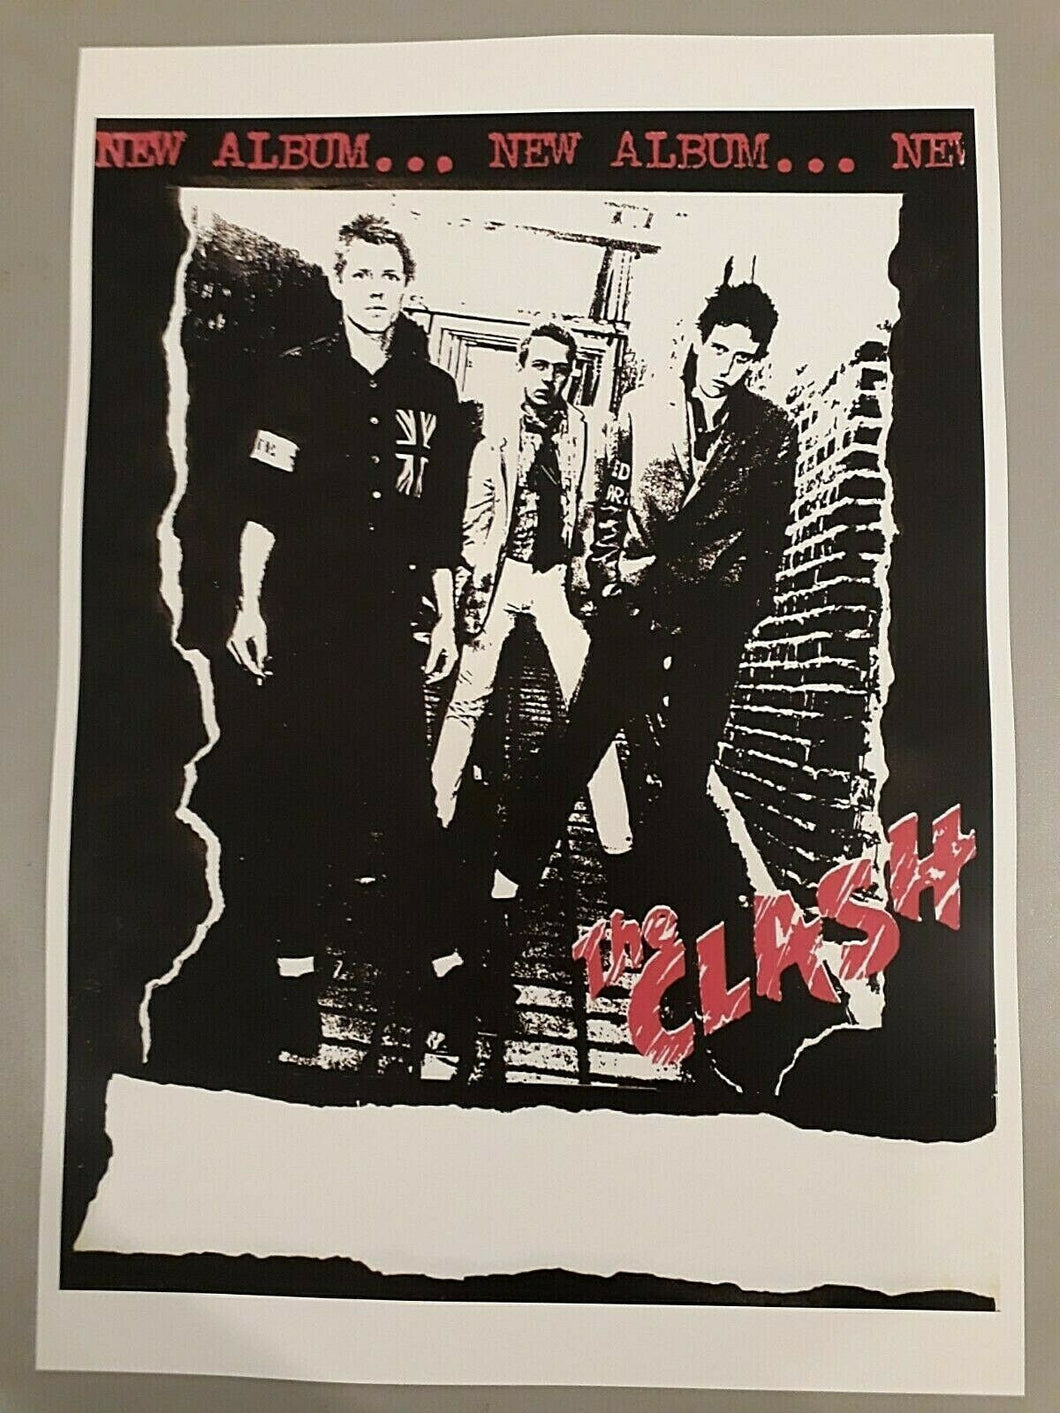 The Clash concert tour poster - White Riot Tour 1977 promotional A3 size reprint - Original Music and Movie Posters for sale from Bamalama - Online Poster Store UK London